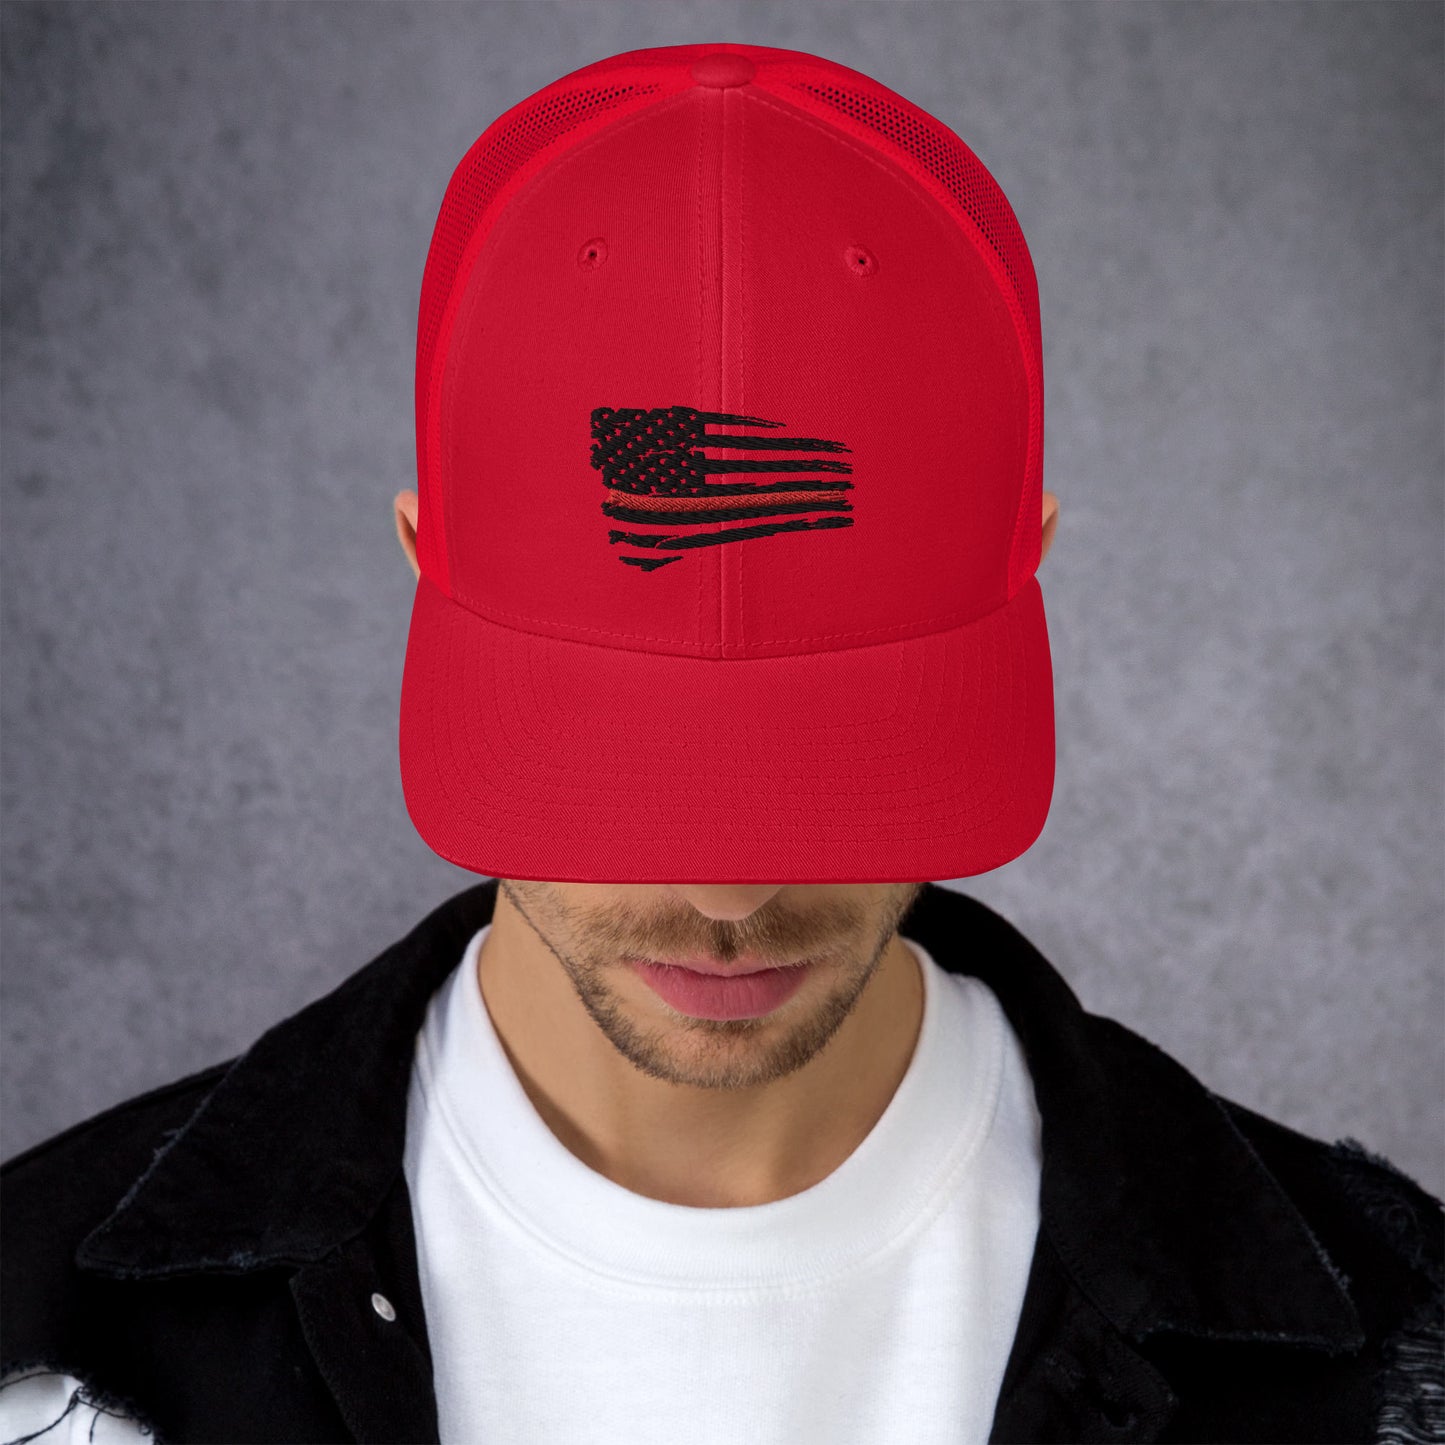 Thin Red Line Tethered Flag Yupoong Trucker Cap